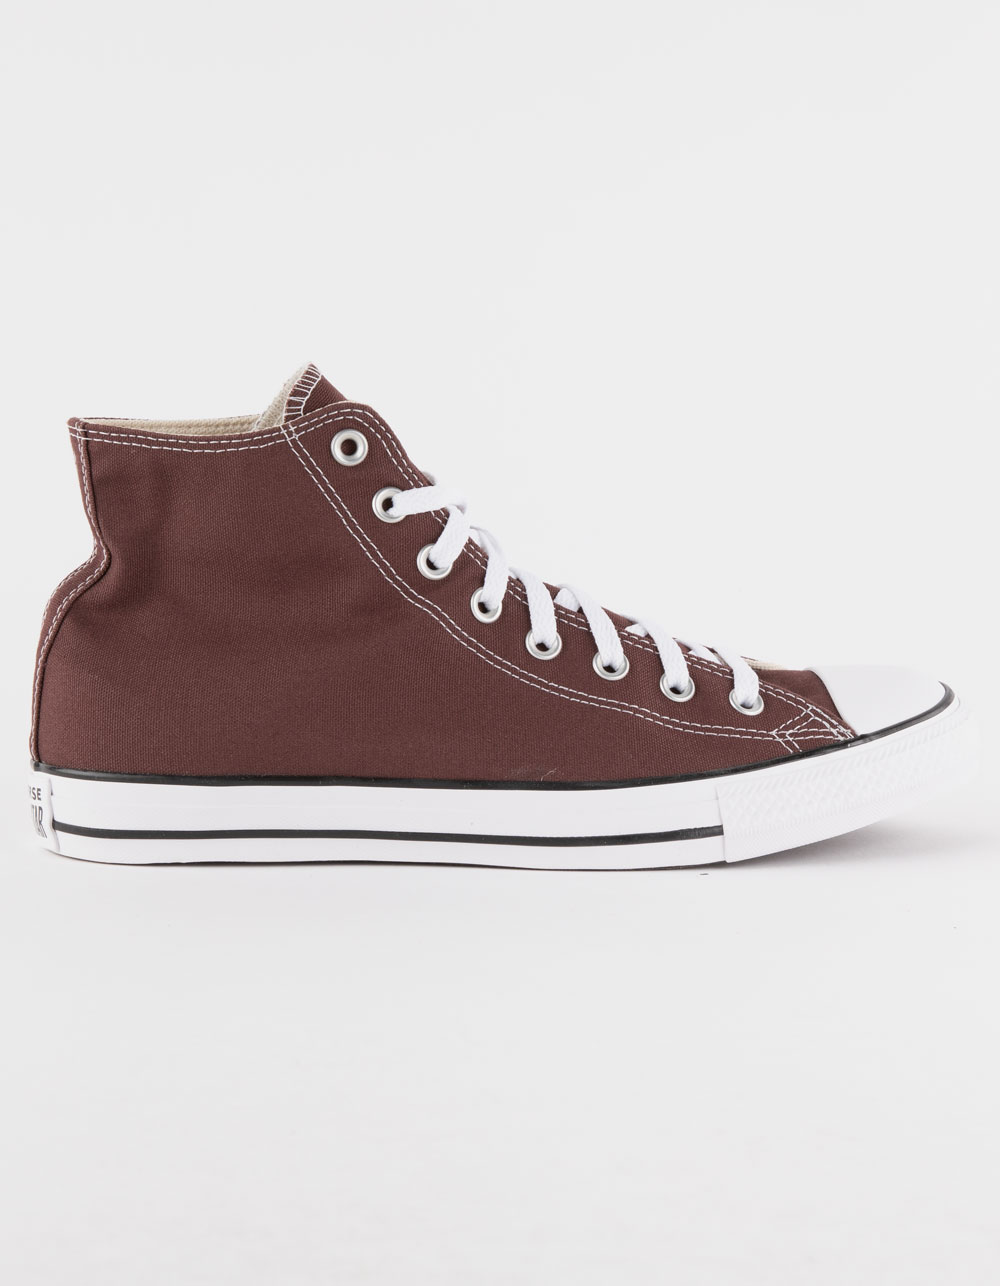 Converse Chuck Taylor All Star High in Brown for Men